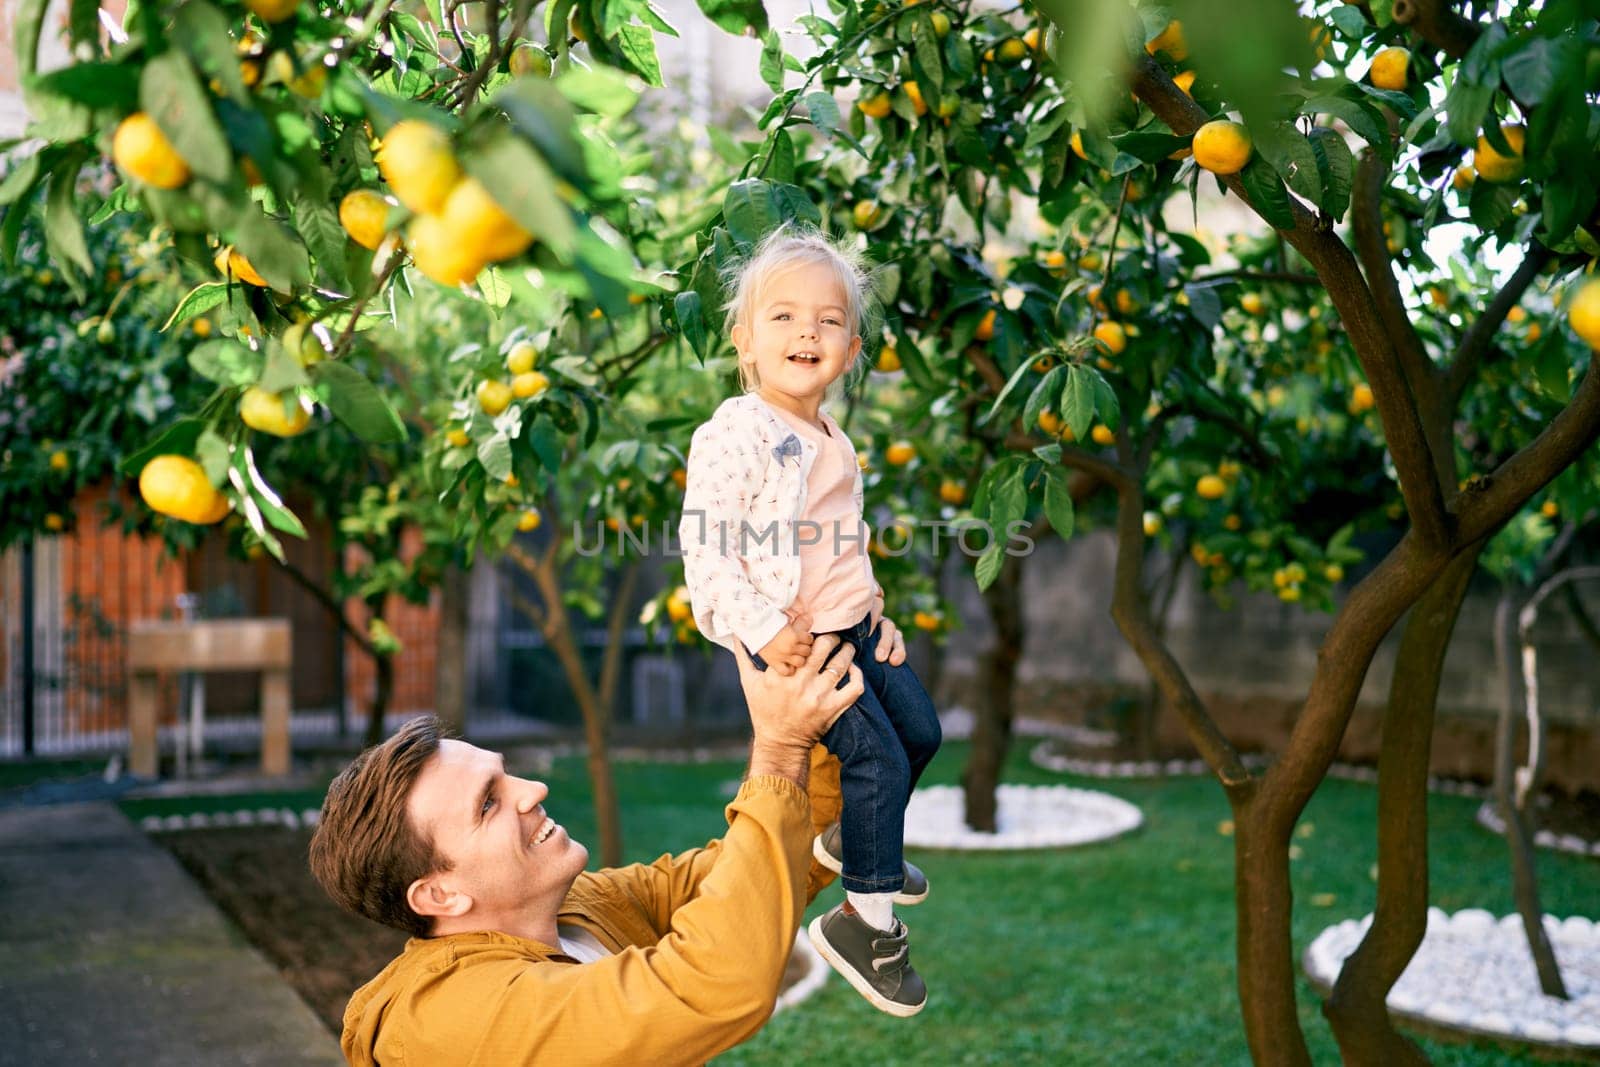 Dad lifts a smiling little girl in his arms to ripe tangerines on a tree. High quality photo